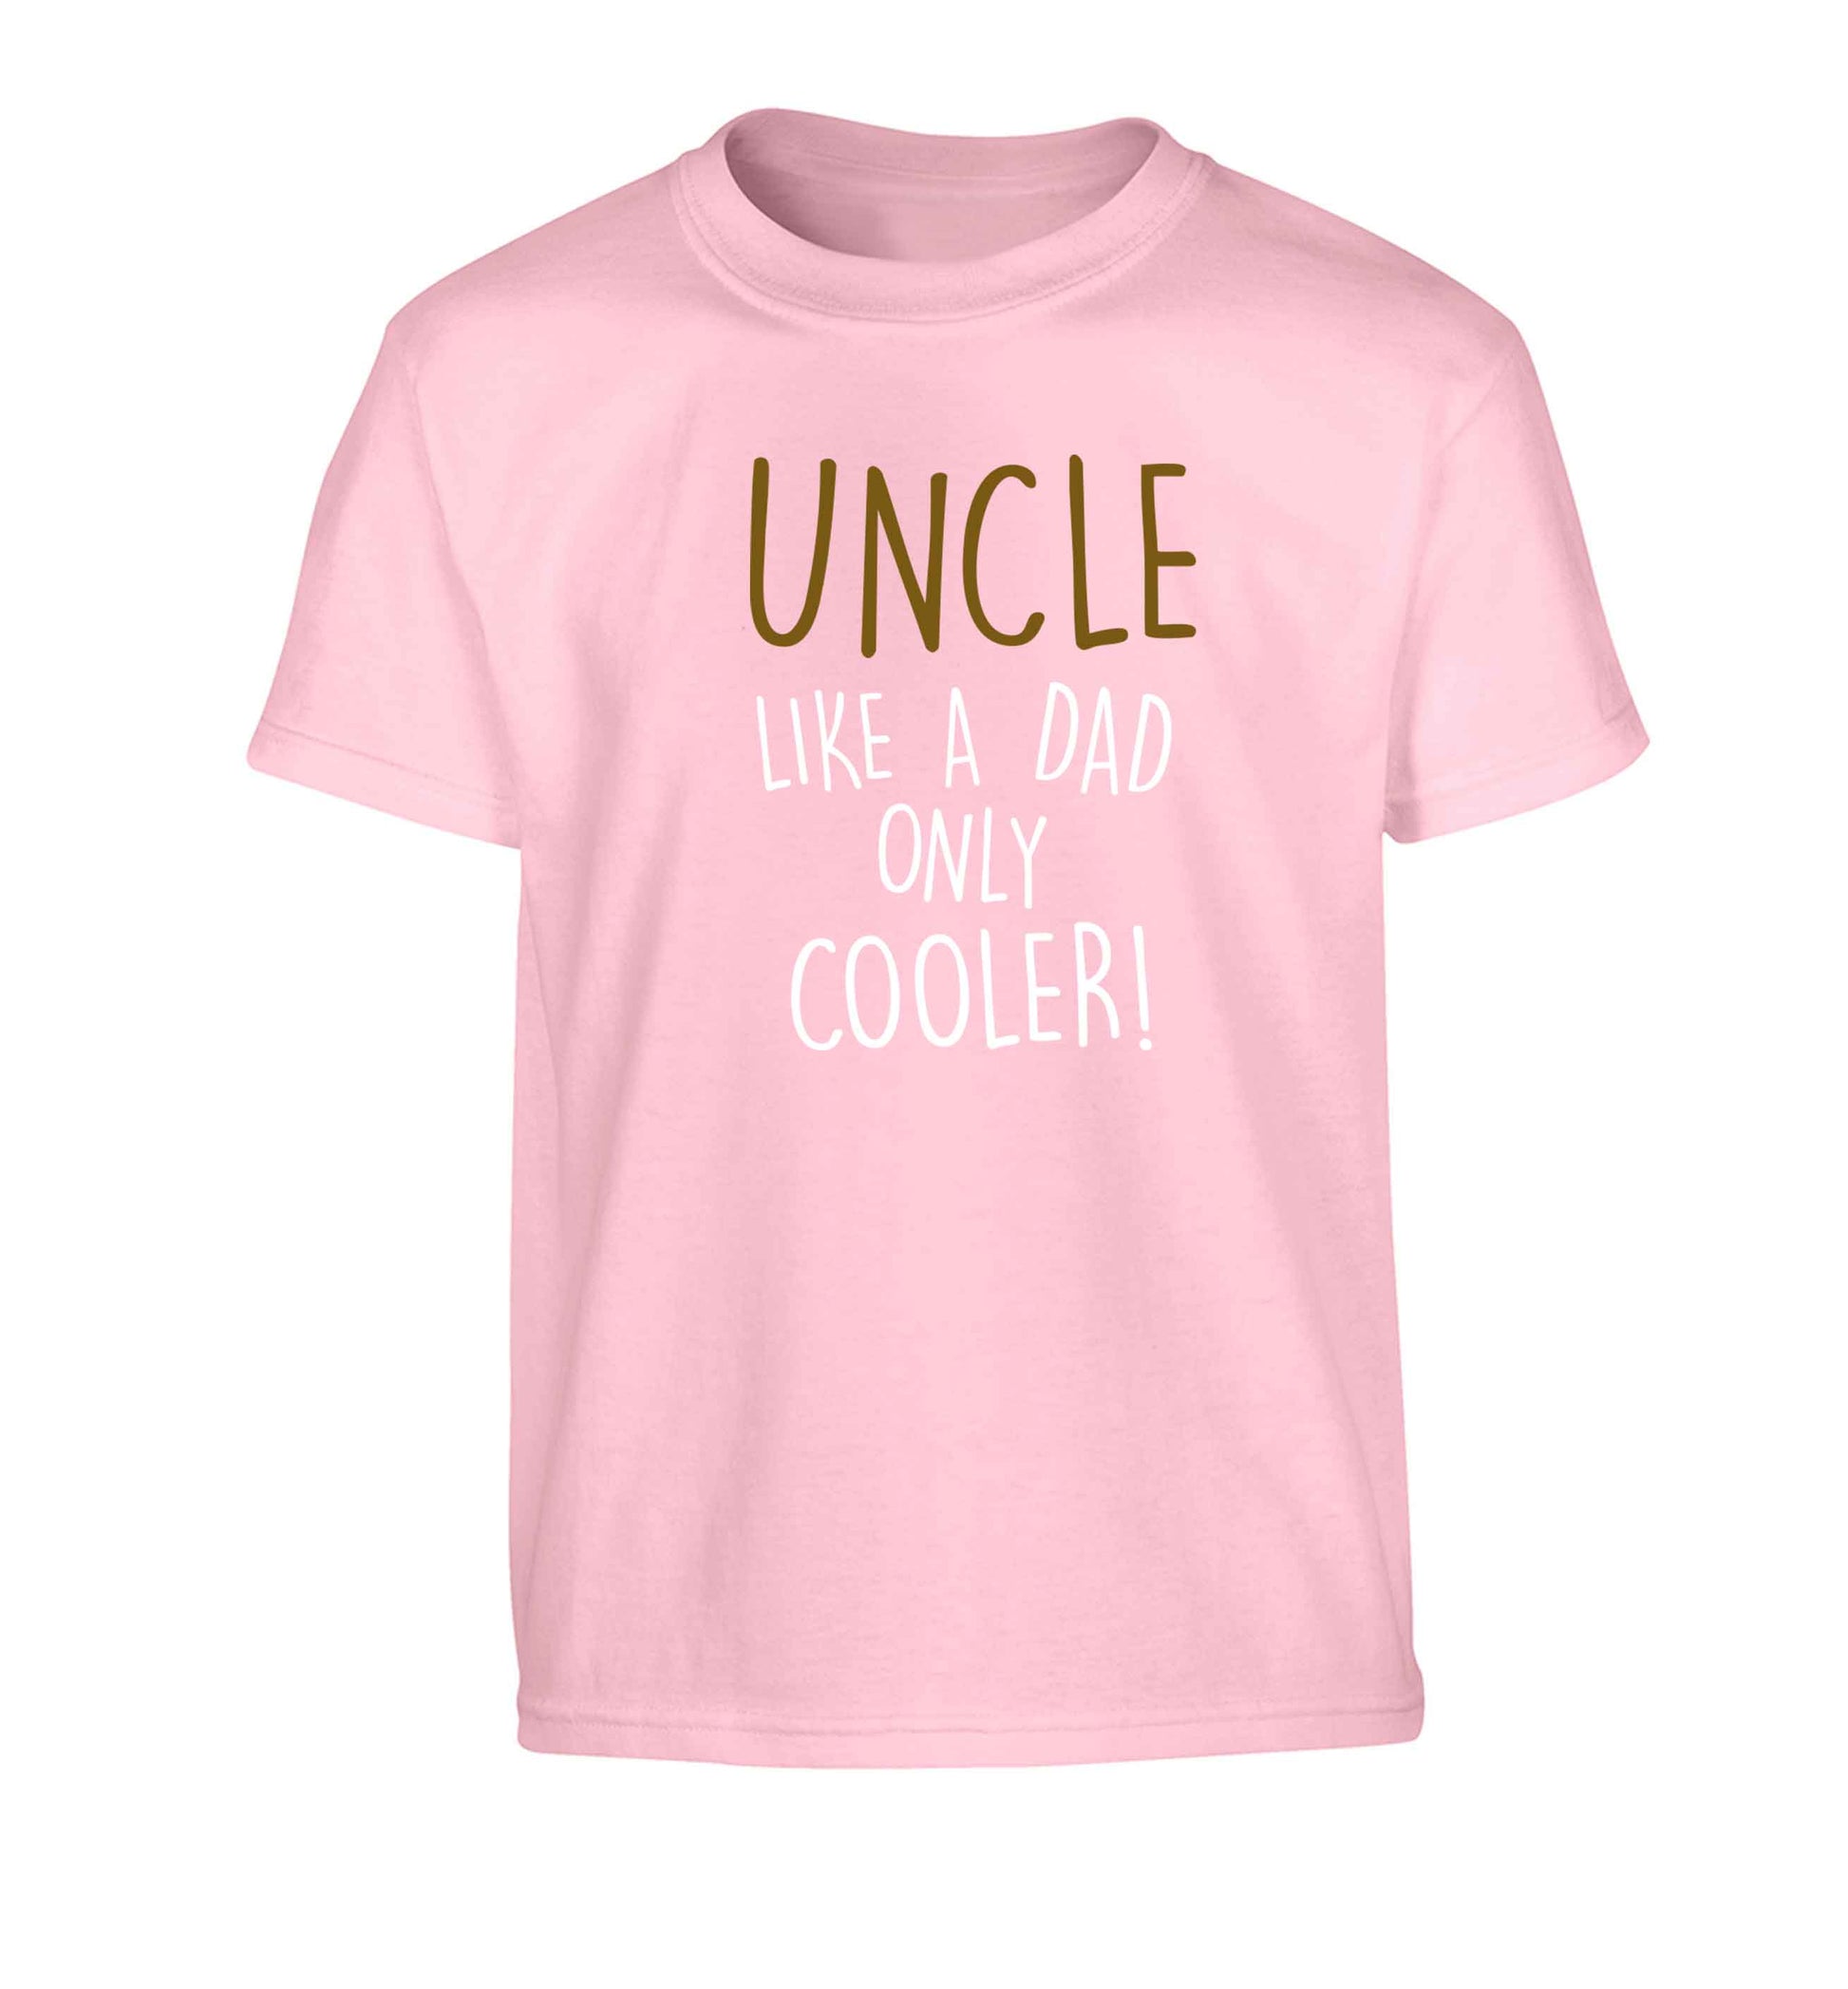 Uncle like a dad only cooler Children's light pink Tshirt 12-13 Years